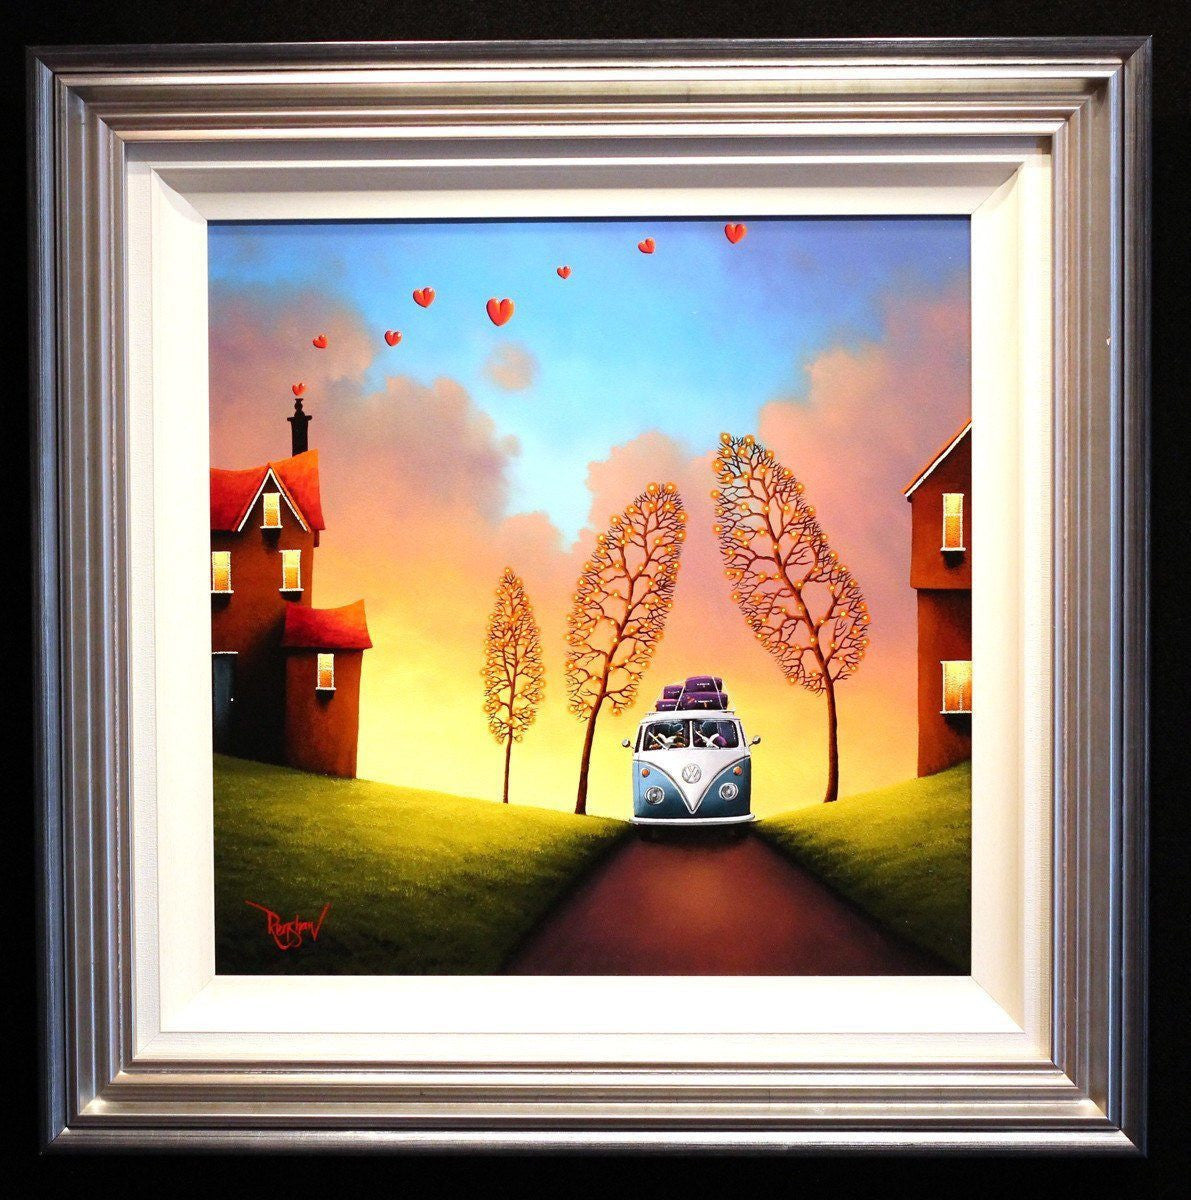 Love is a Journey - SOLD David Renshaw